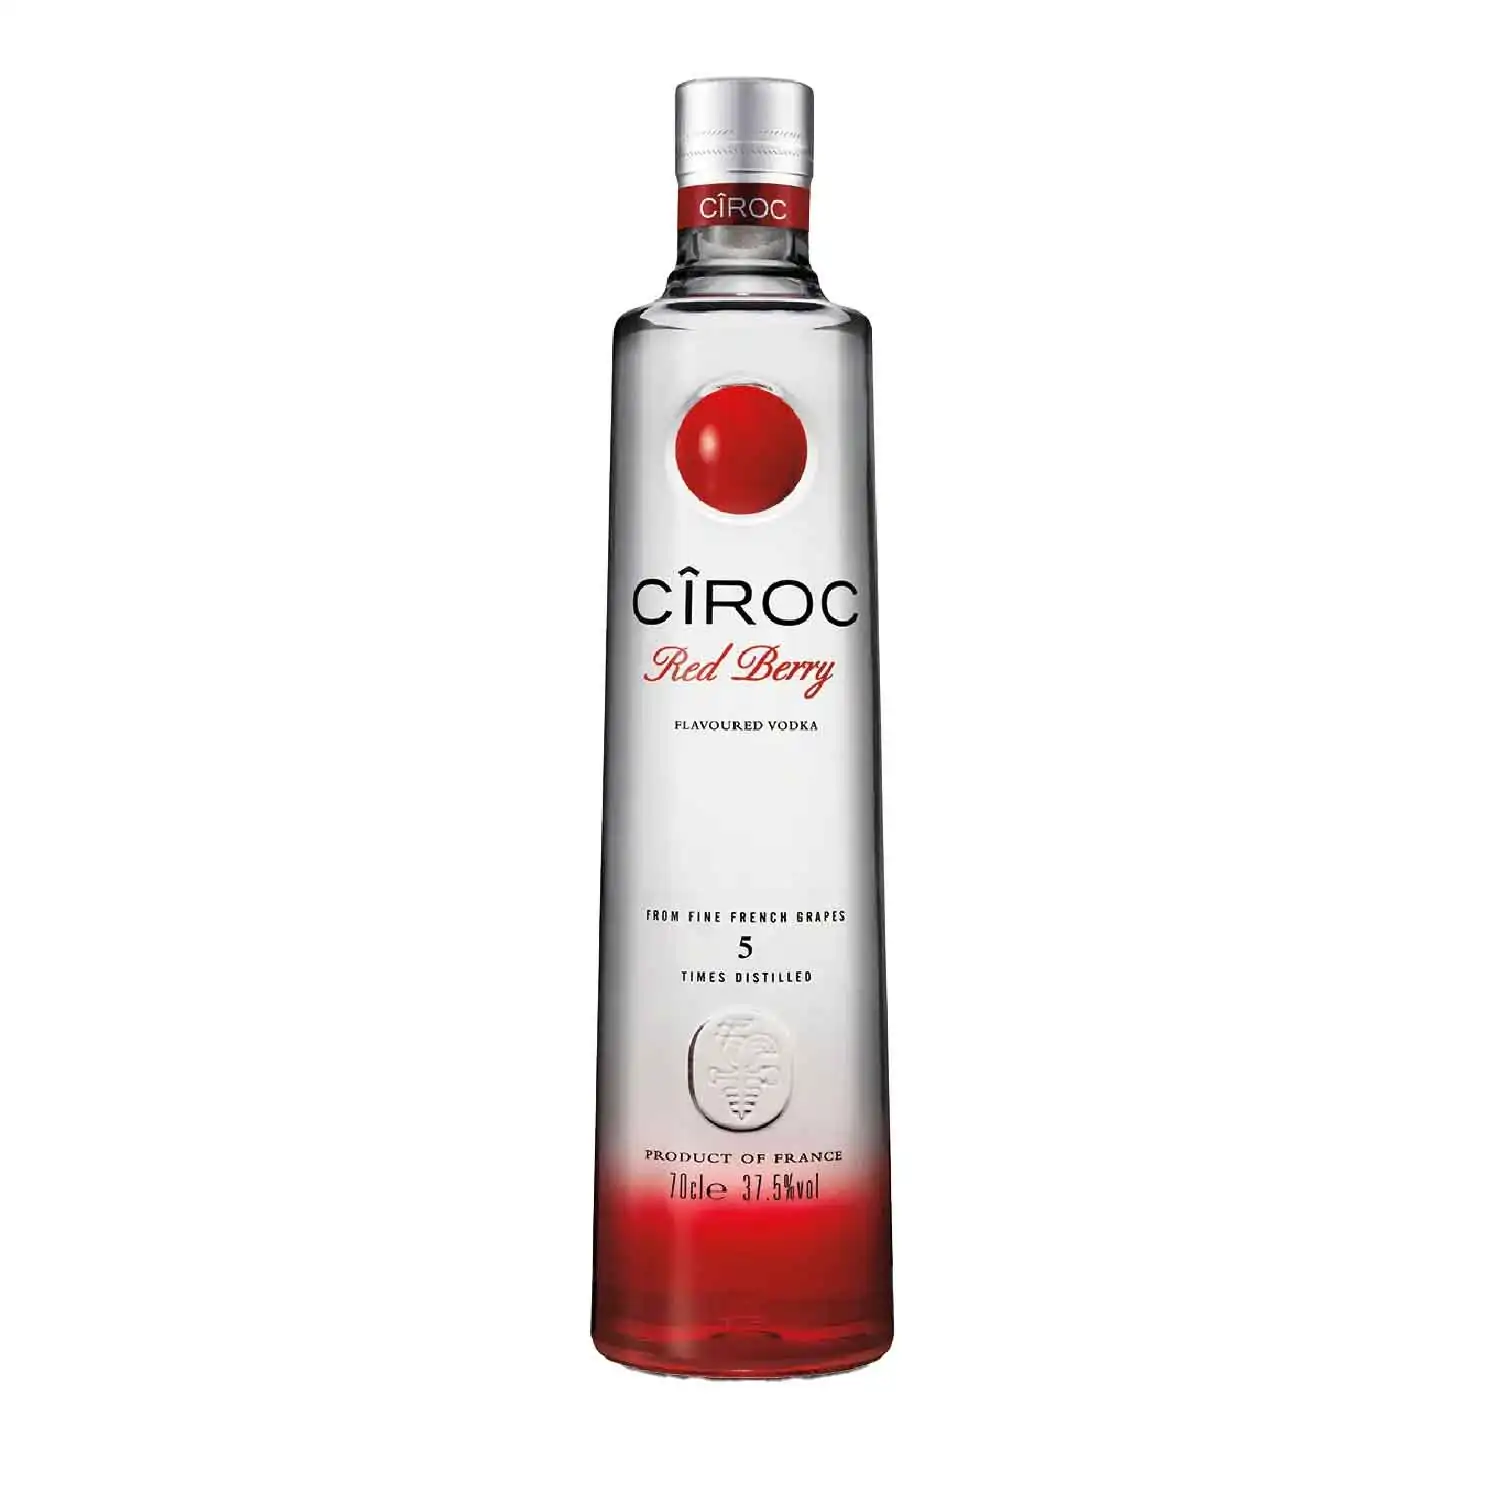 Cîroc red berry 70cl Alc 37,5% - Buy at Real Tobacco